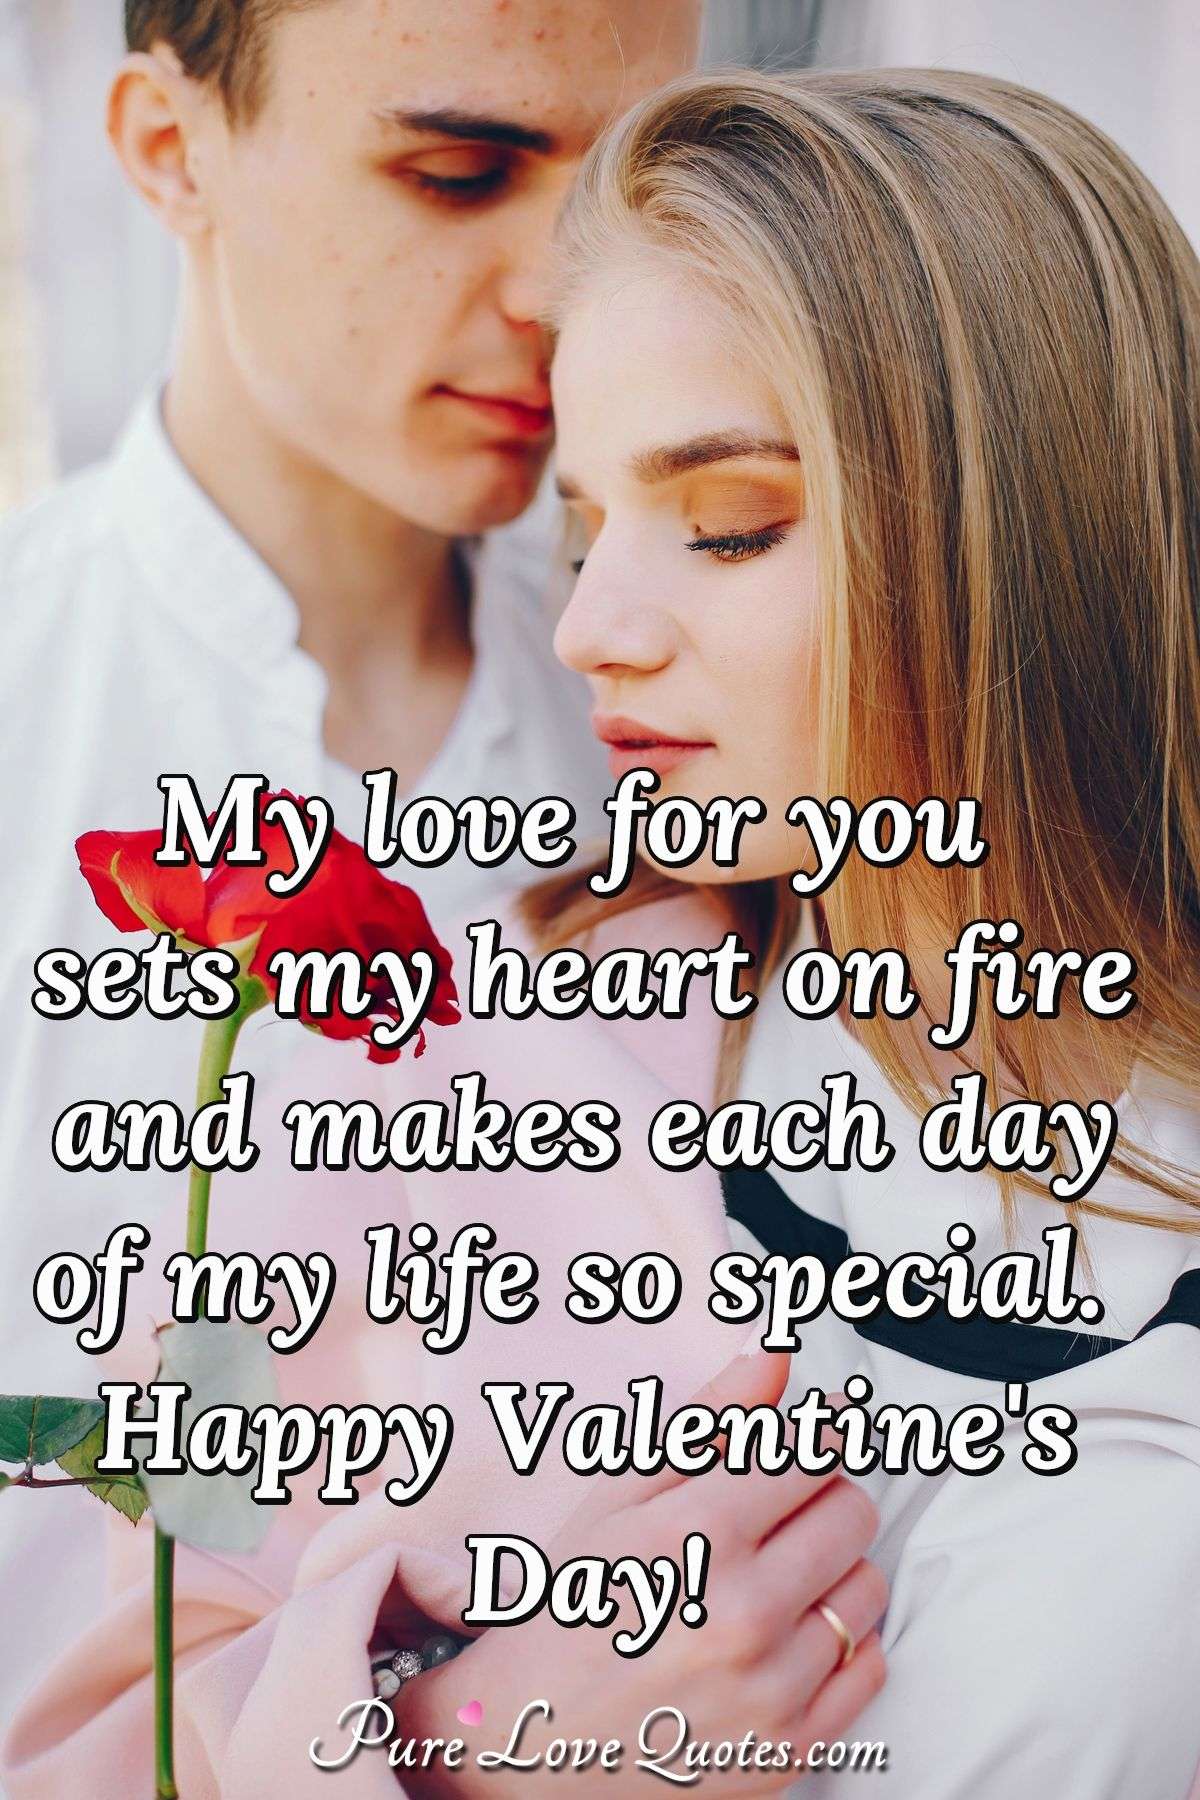 My love for you sets my heart on fire and makes each day of my life so special. Happy Valentine's Day! - Anonymous